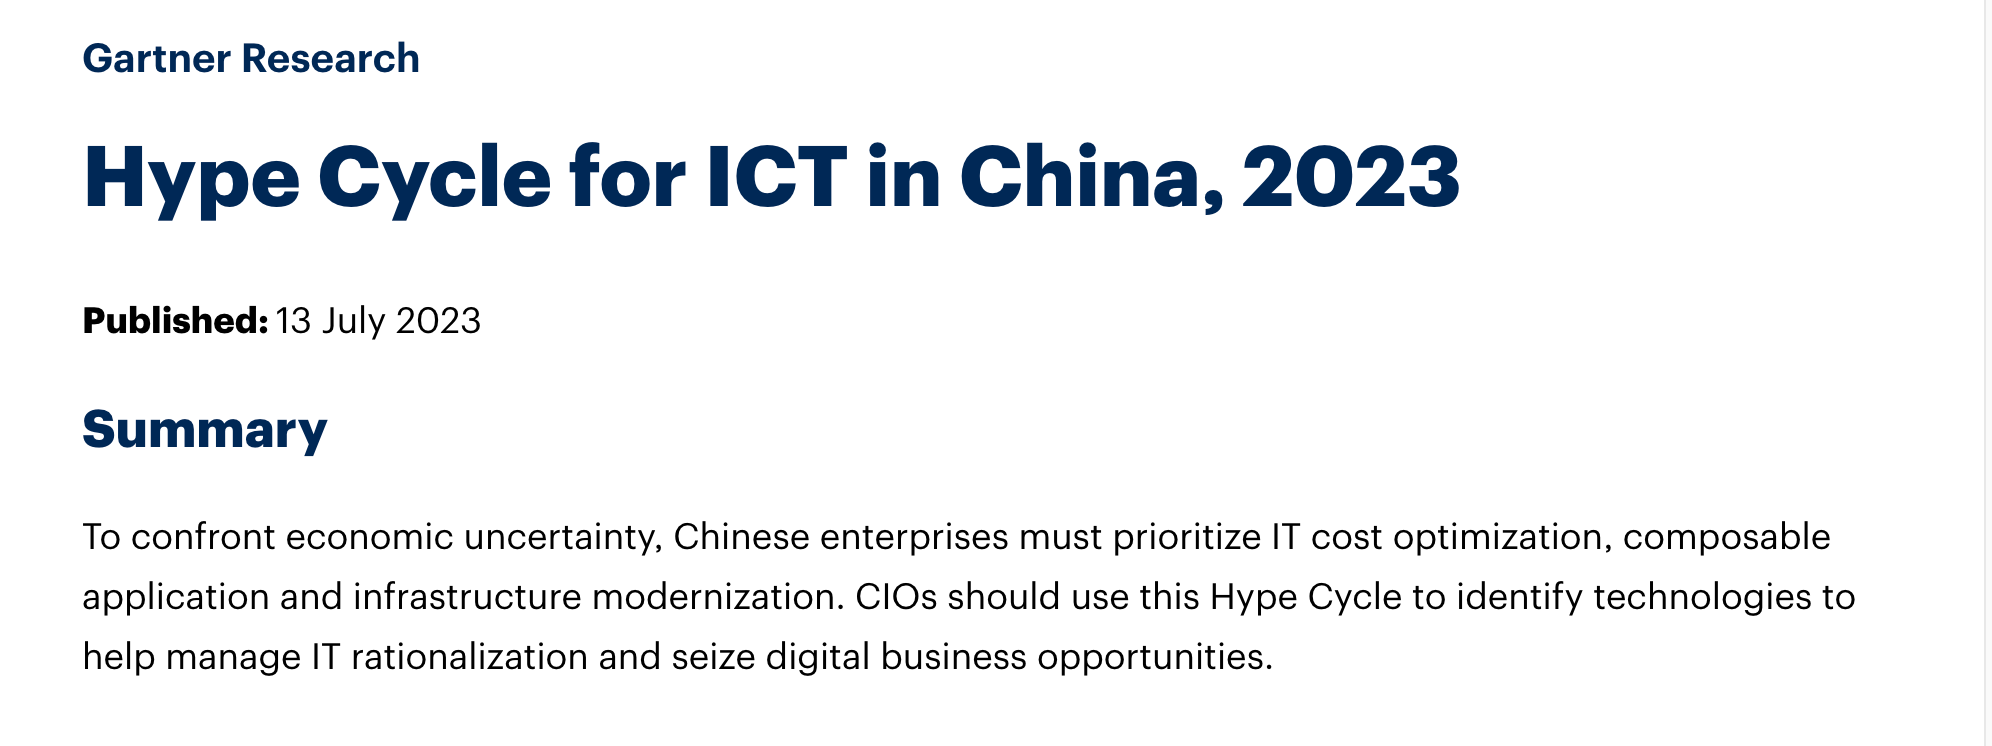 Gartner Hype Cycle for ICT in China, 2023